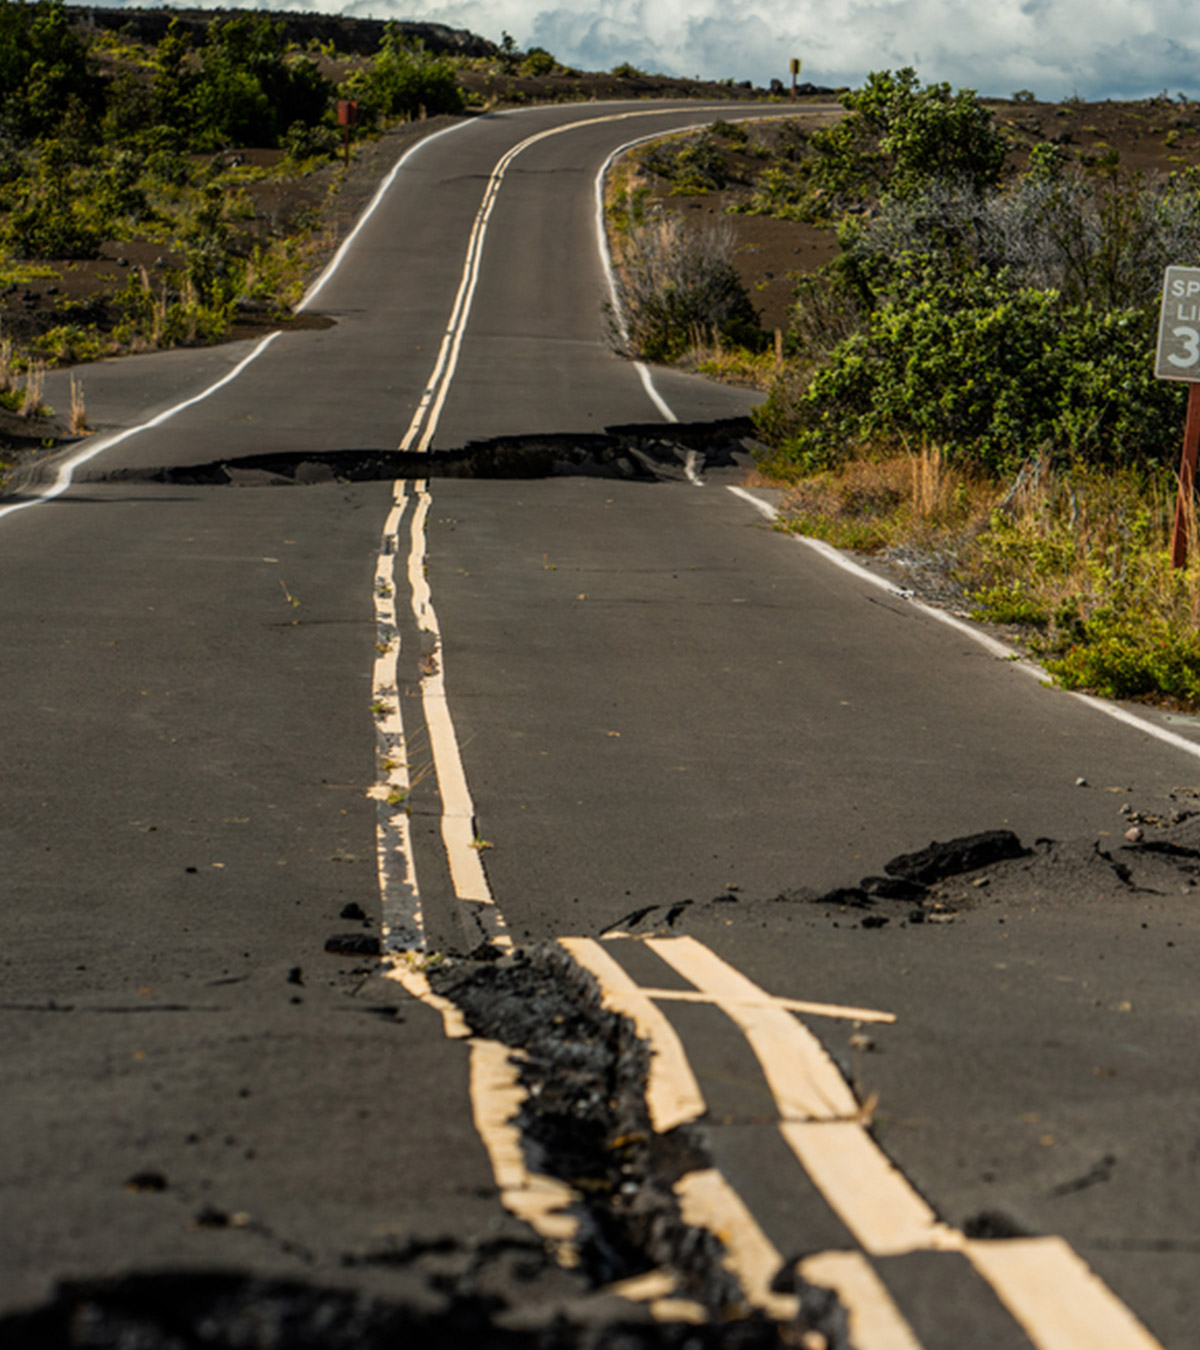 30 Informative & Intriguing Facts About Earthquakes For Kids